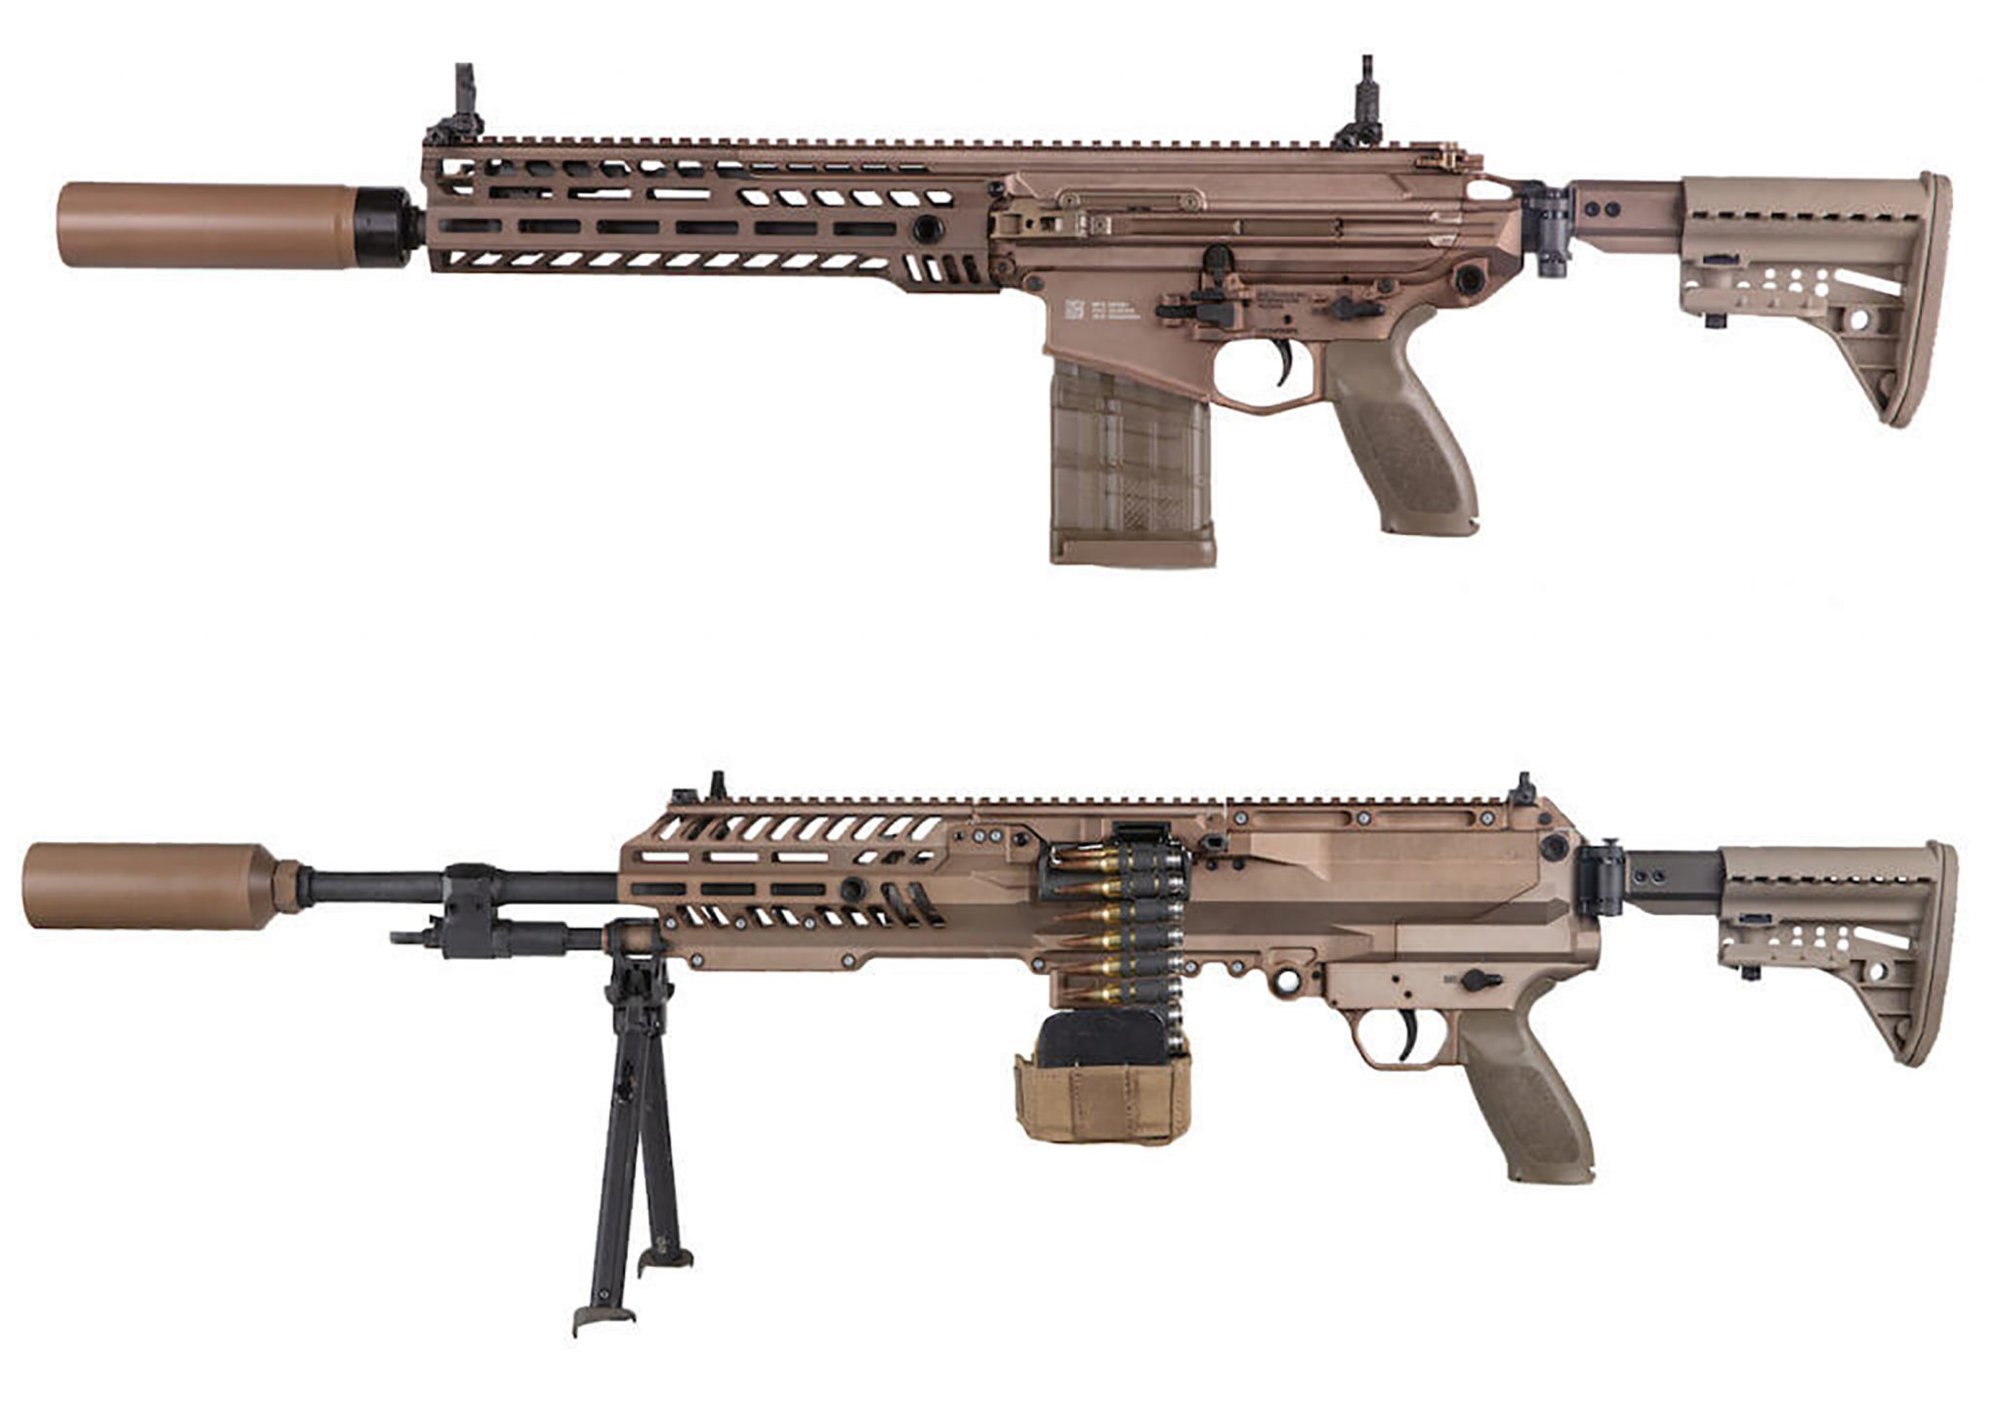 Sig Sauer’s NGSW-AR, bottom, and NGSW-R, top, have been delivered to the Army as Next Generation Squad Weapon prototypes. Photo courtesy of Sig Sauer.